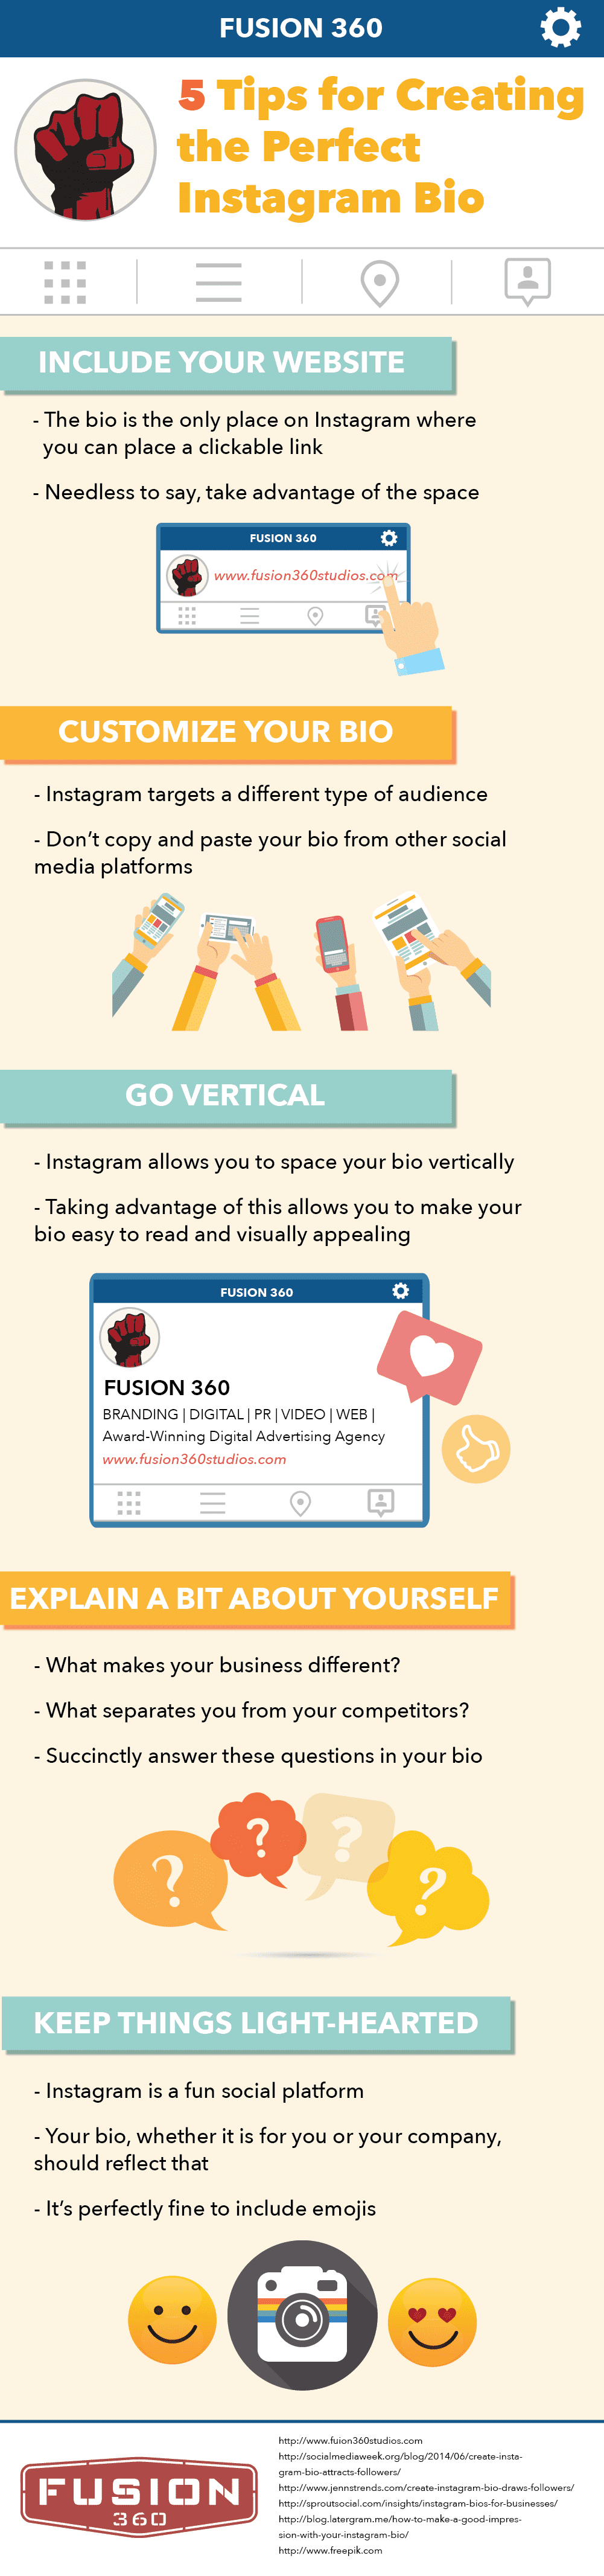 Fusion 360 - 5 Tips for Creating the Perfet Instagram Bio (Fusion 360 Agency)